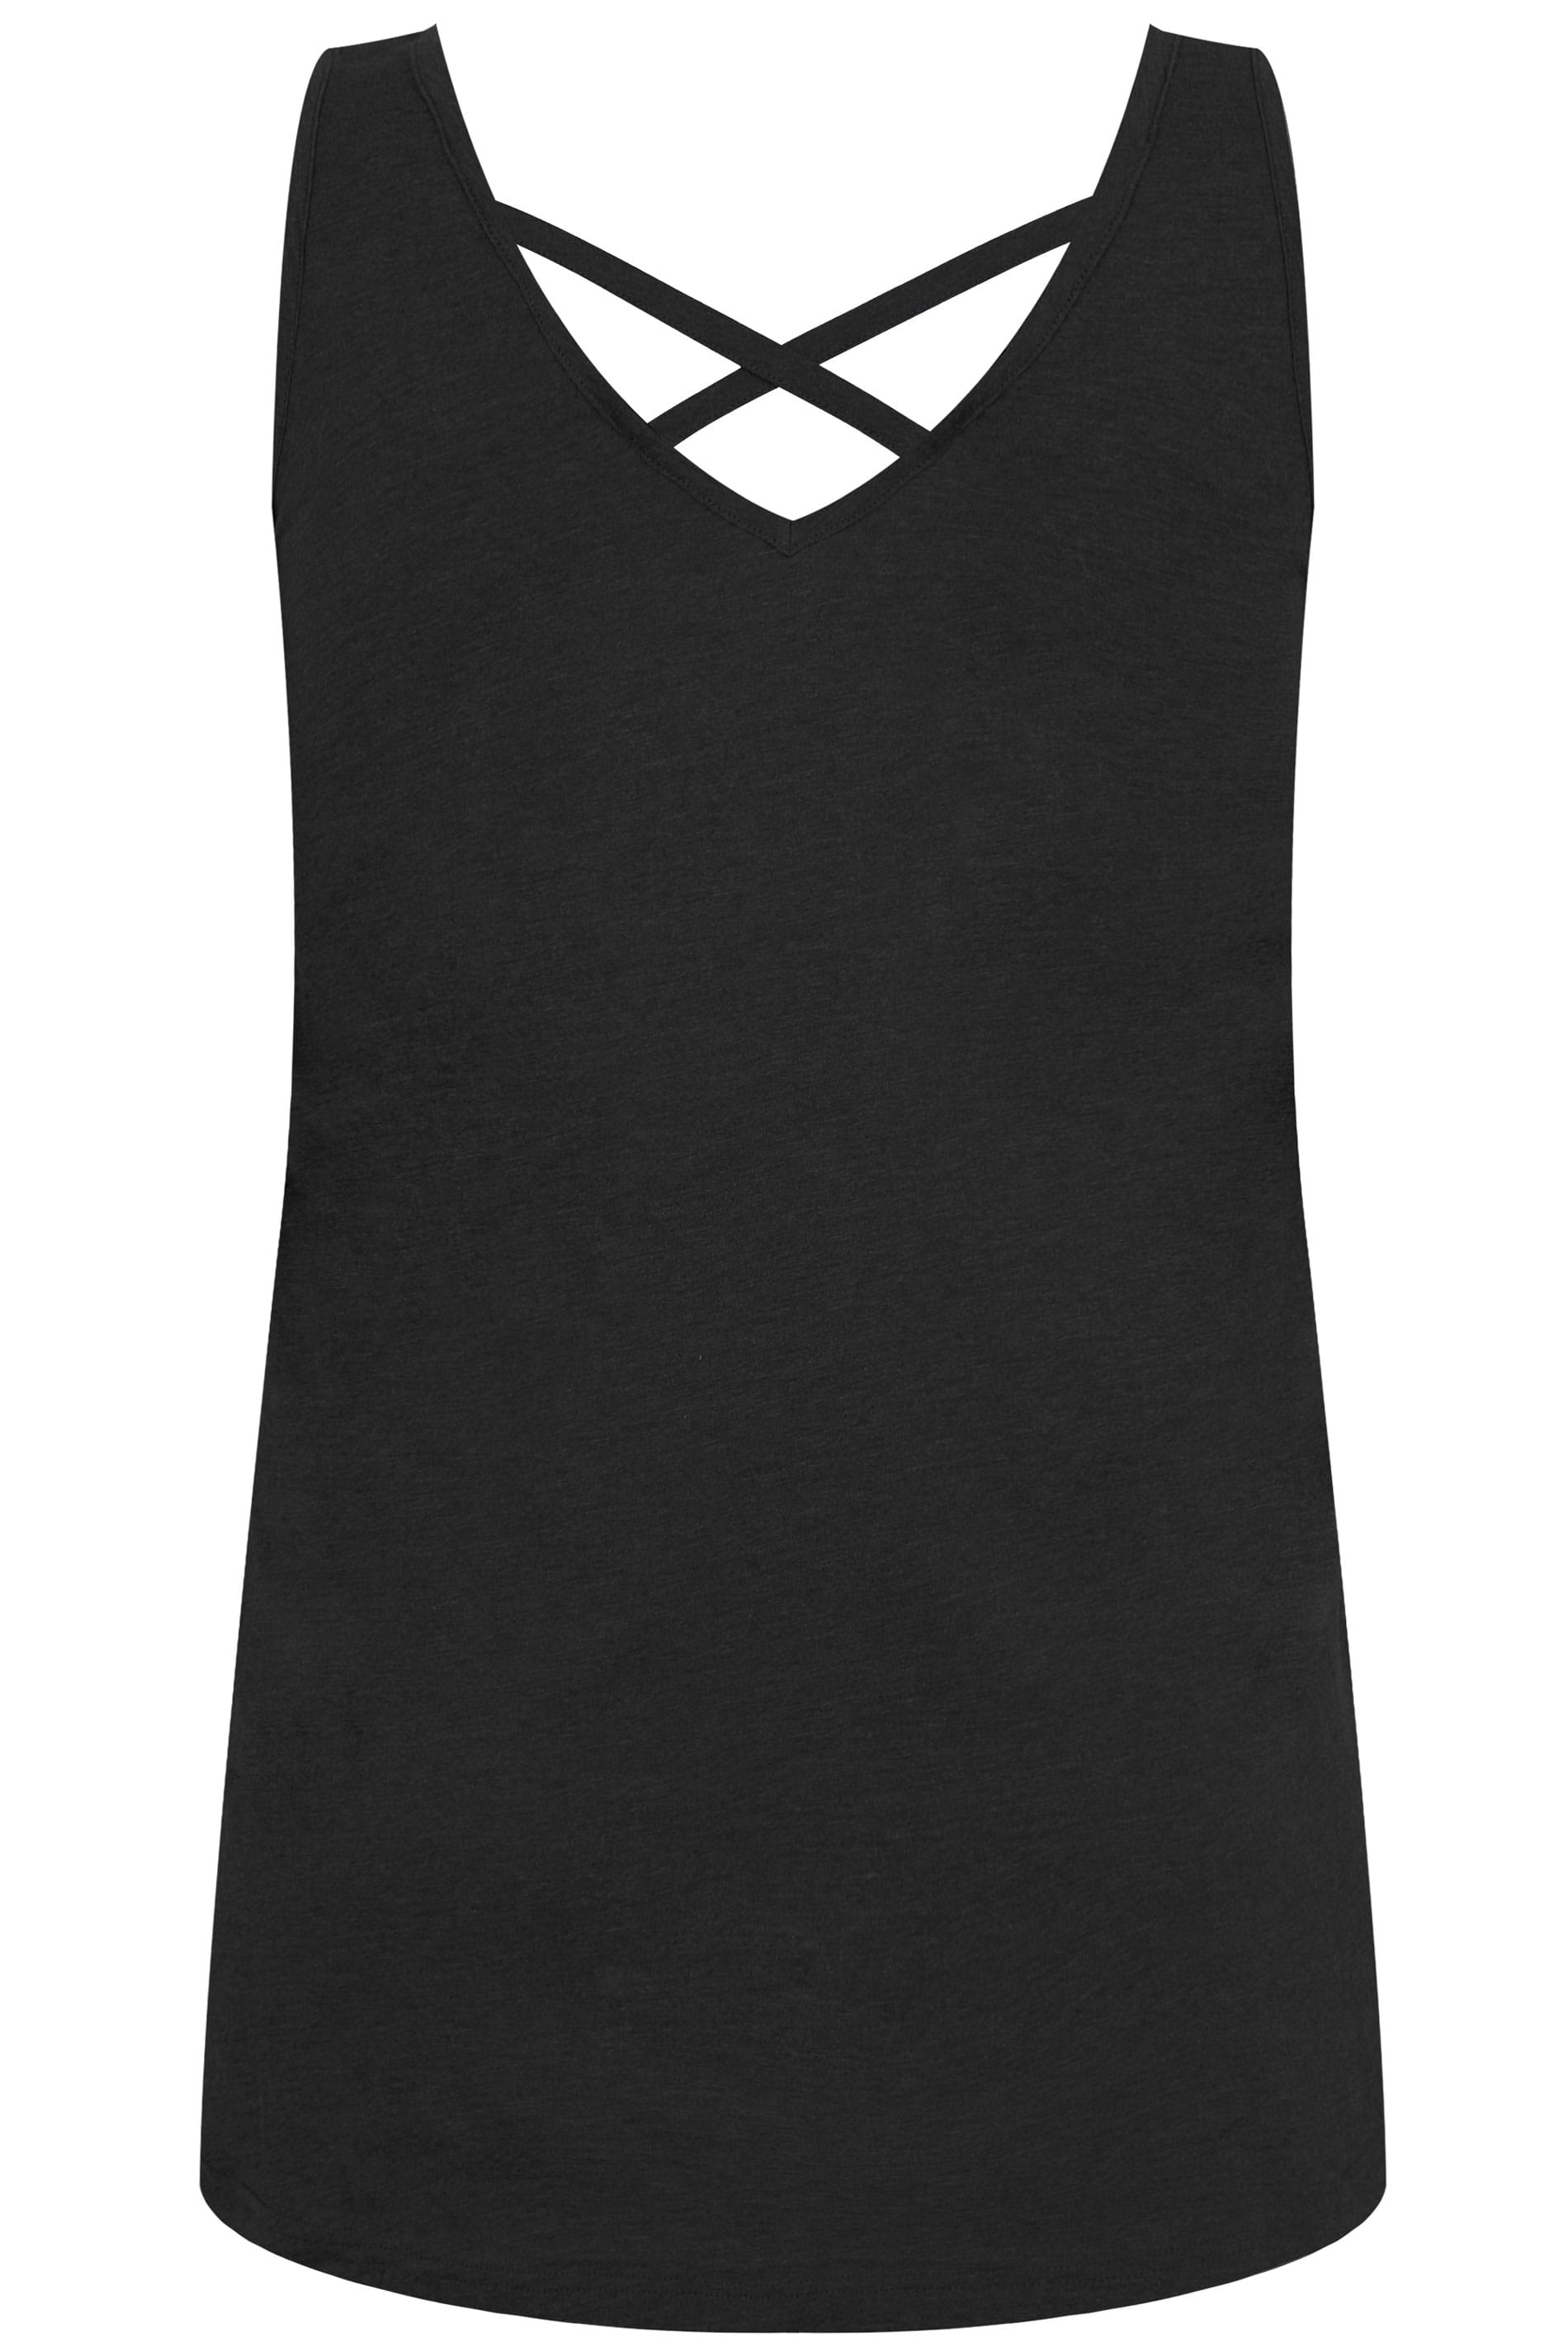 Black Longline Vest Top With Cross Over Straps, plus size 16 to 36